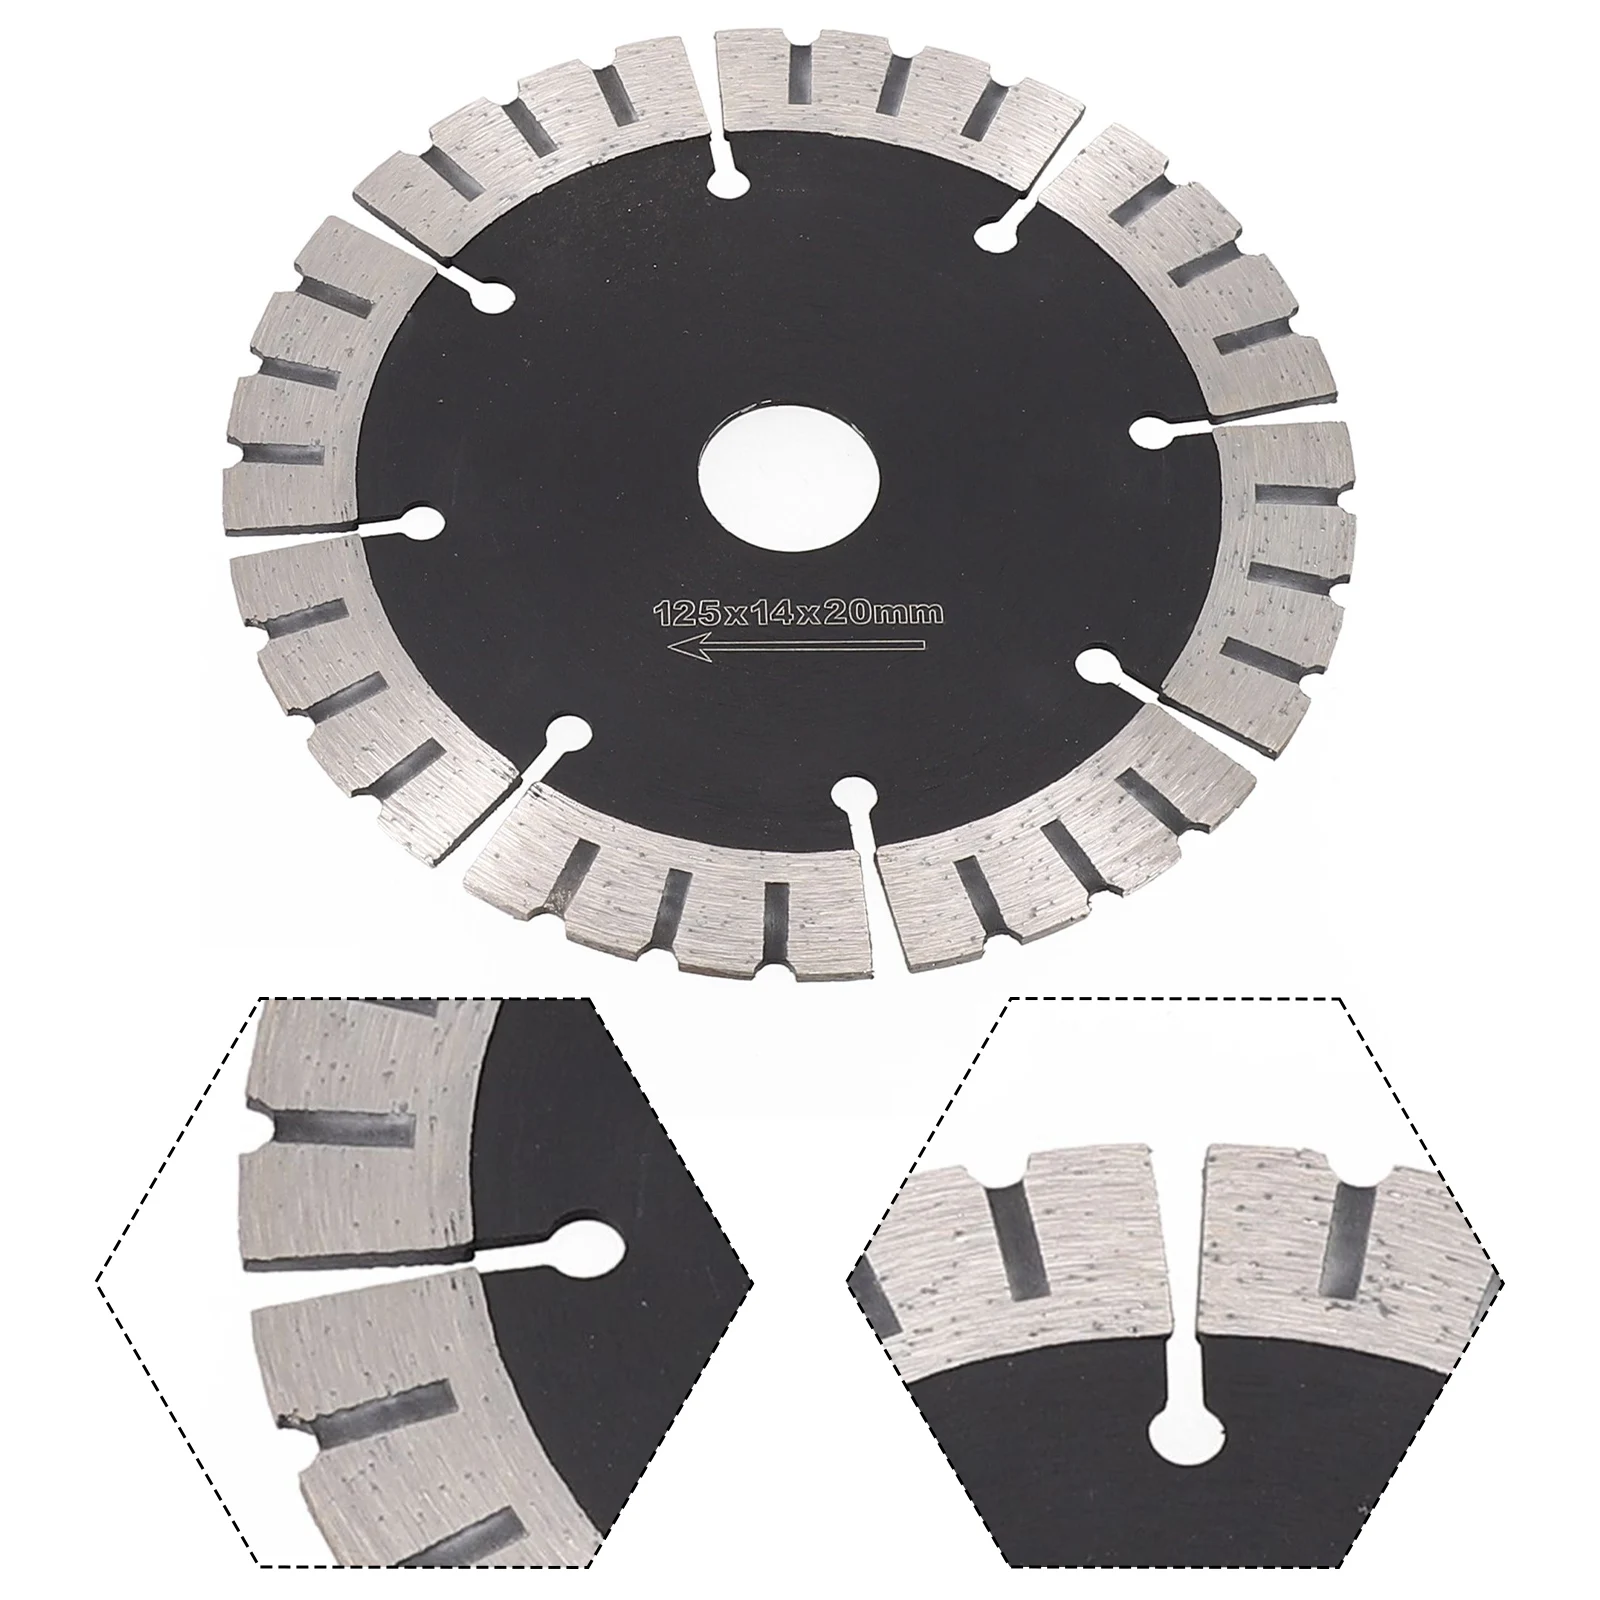 Cutting Tools Diamond Saw Blade Cutting Disc 1Pc 5inch Diameter 125mm Replacement Segment Saw Blade High Qulity 0 25 25 50 50 75 75 100 100 125mm knife edge 0 7mm thin disc outside diameter micrometer annular groove keyway measuring tools